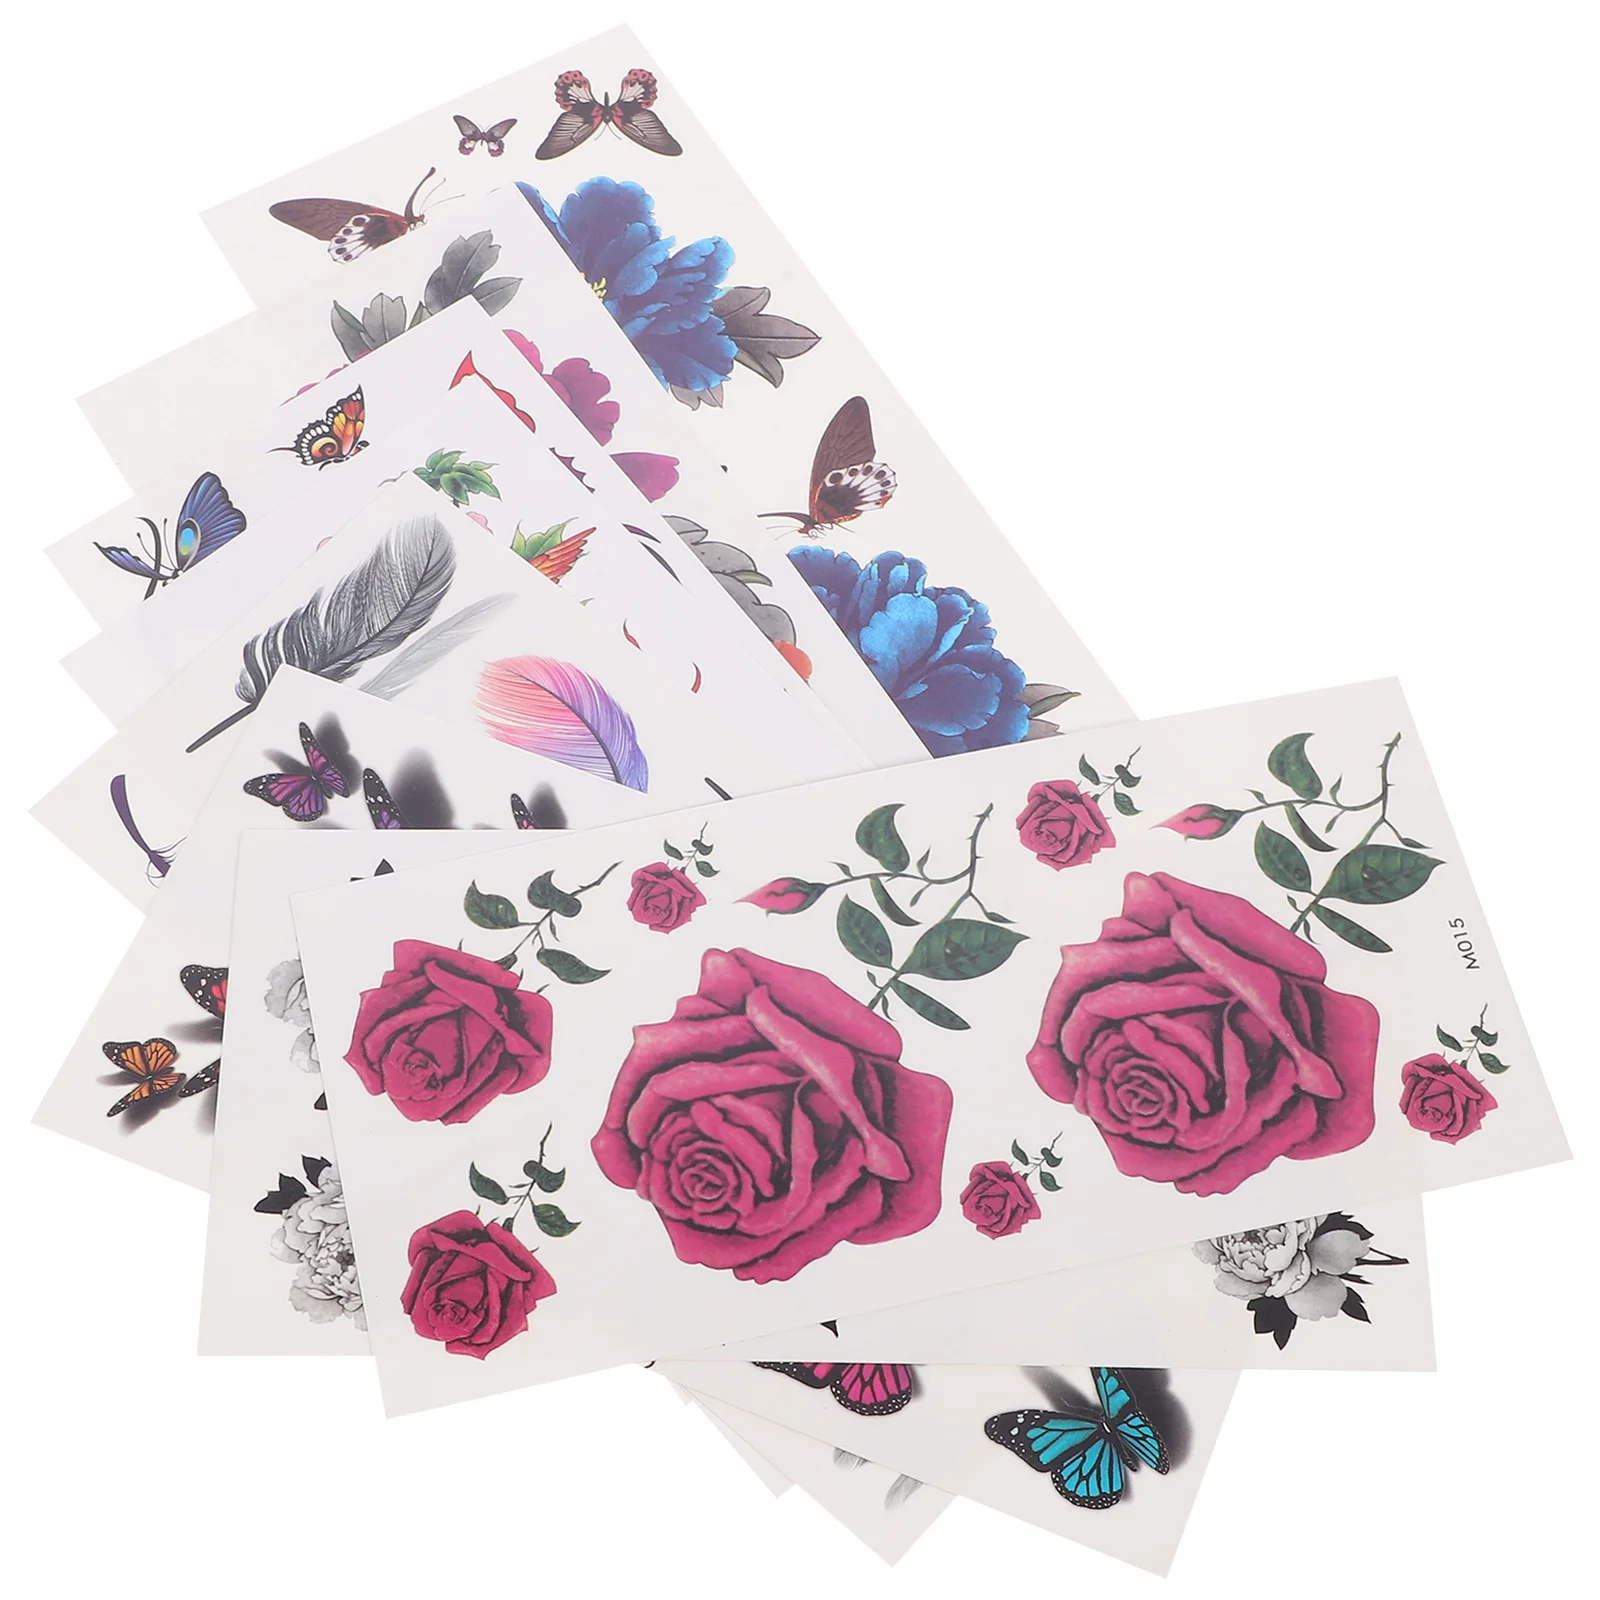 

8 Sheets 3D Flowers Temporary Tattoos Stickers, Roses, Butterflies and Multi- Colored Mixed Style Body Temporary Tattoos for,